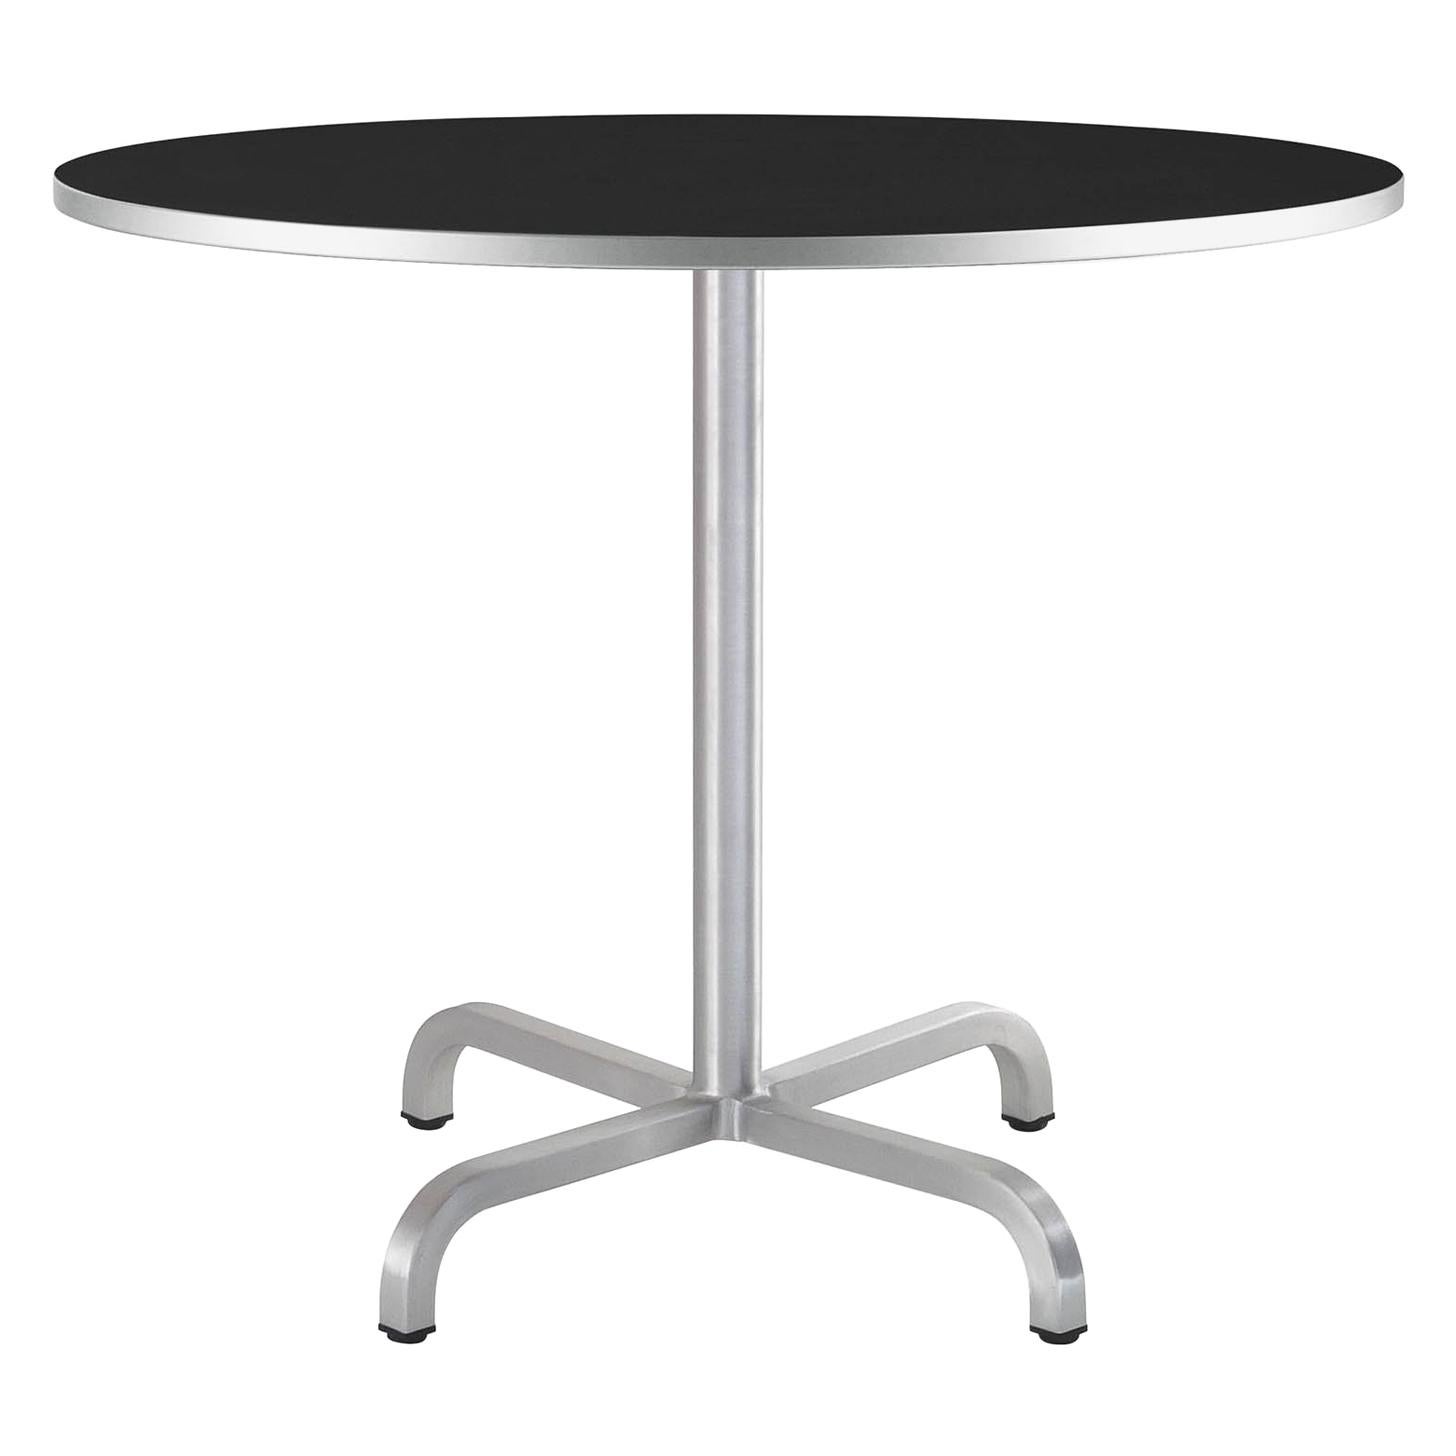 Emeco 20-06 Large Round Café Table with Black Laminate Top by Norman Foster